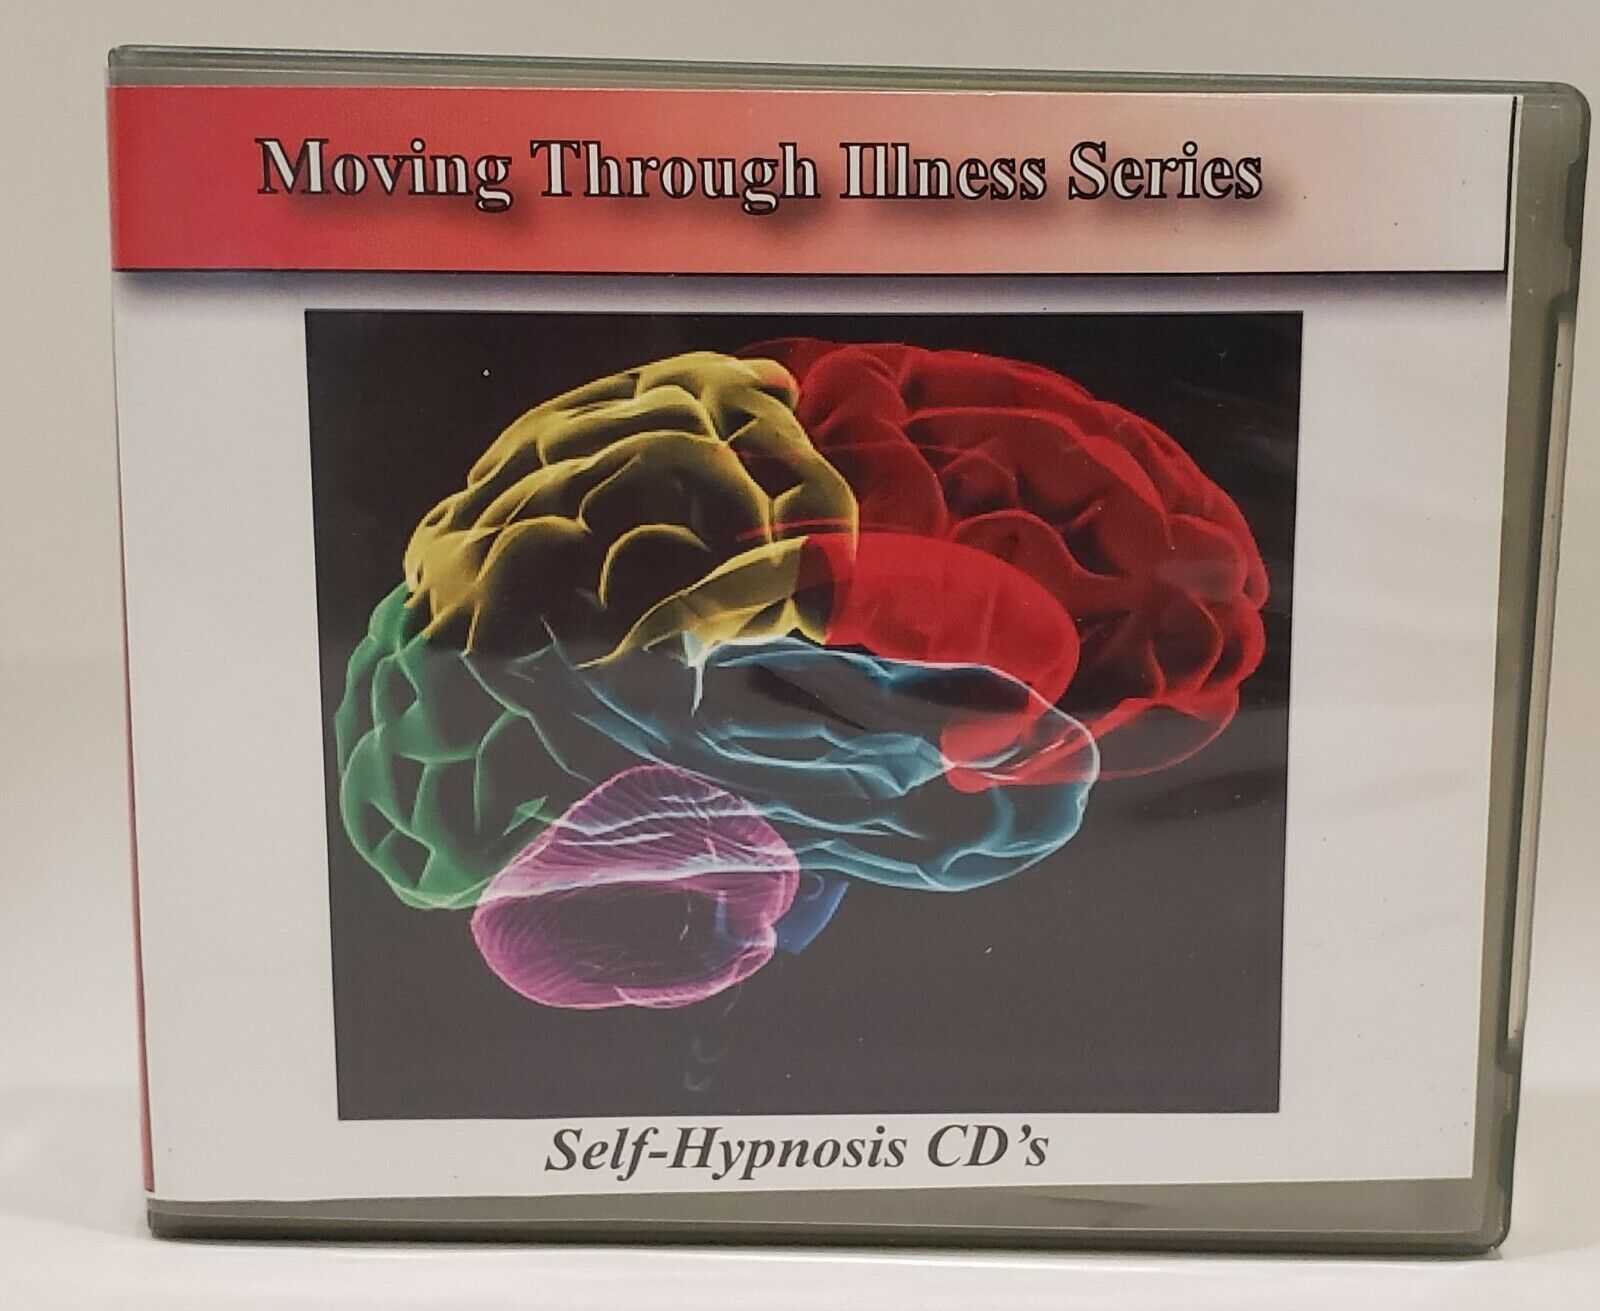 Laura King Self-hypnosis 12 Cds Moving Through Illness Series 12 Cds In Case